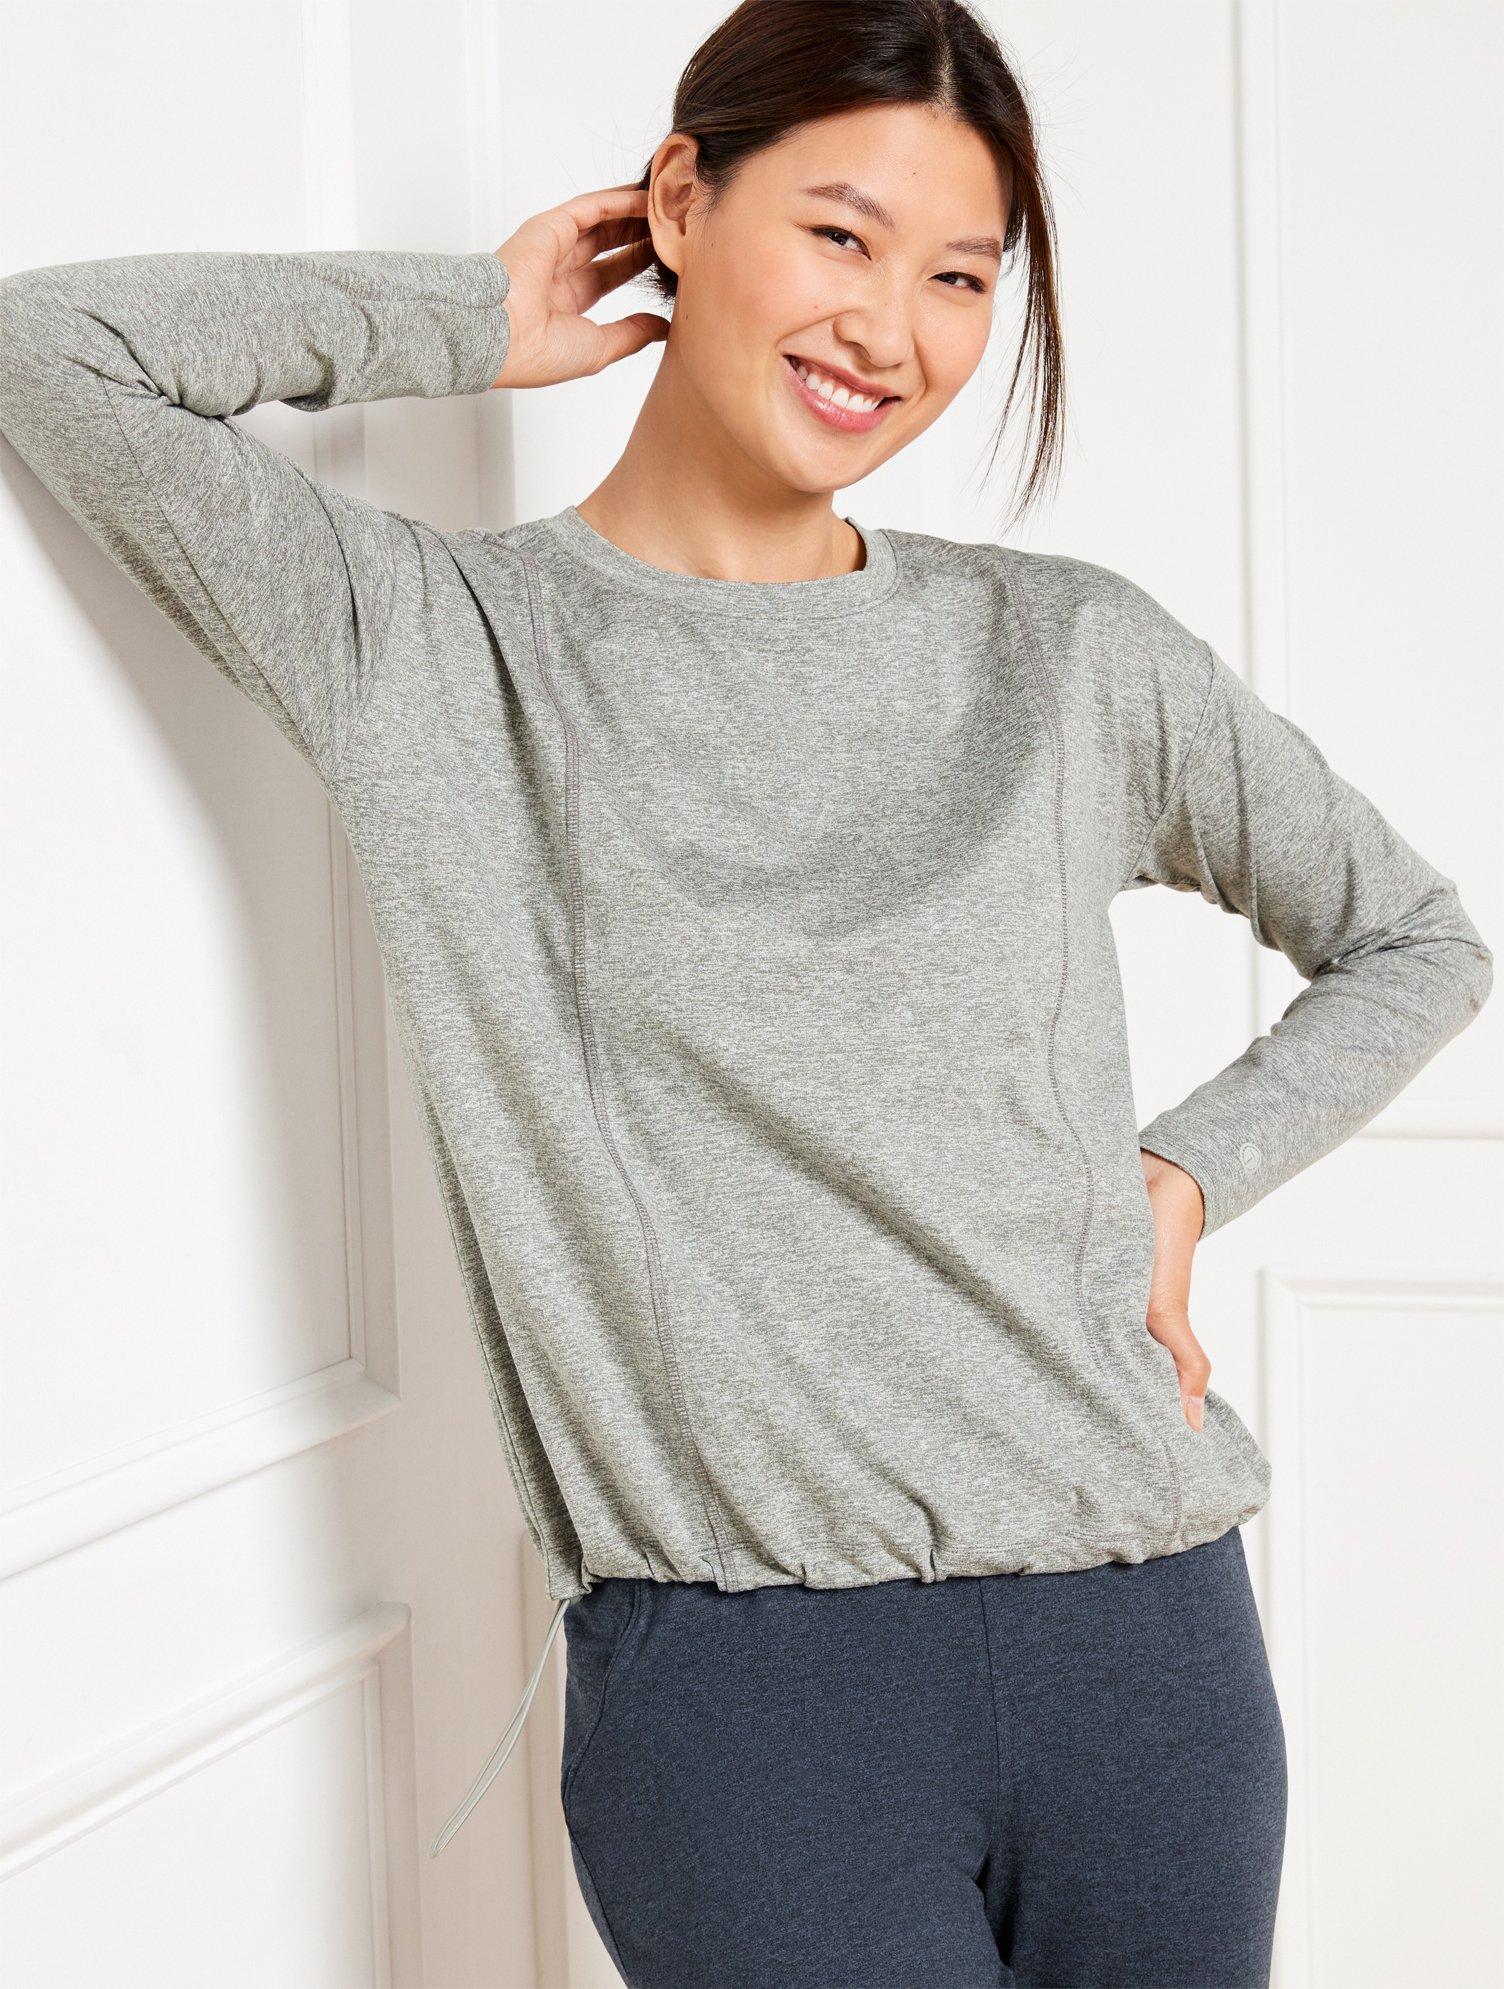 Talbots Buttery Soft Easy Knit Bungee Hem T-shirt in Grey